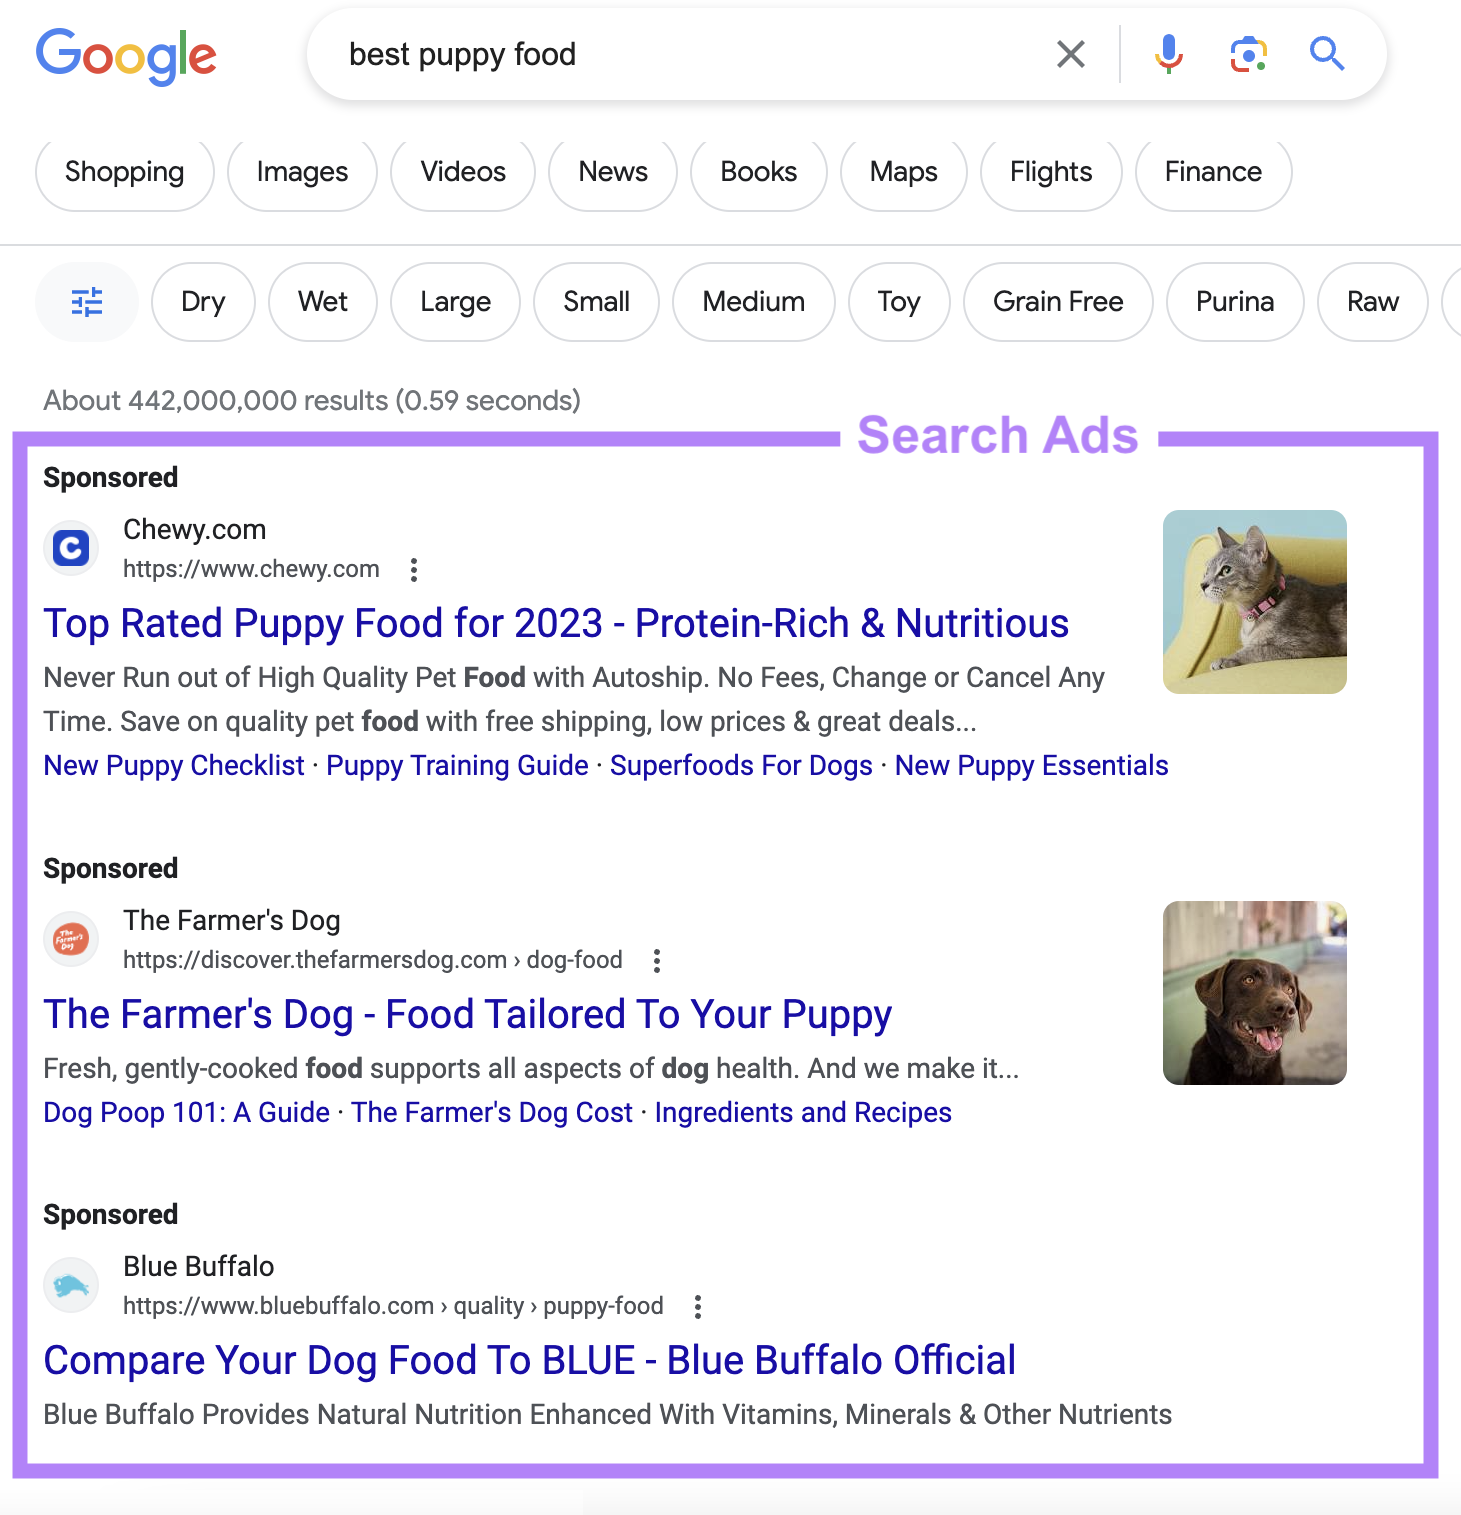 Google search for “best puppy food” shows sponsored ads from pet food companies